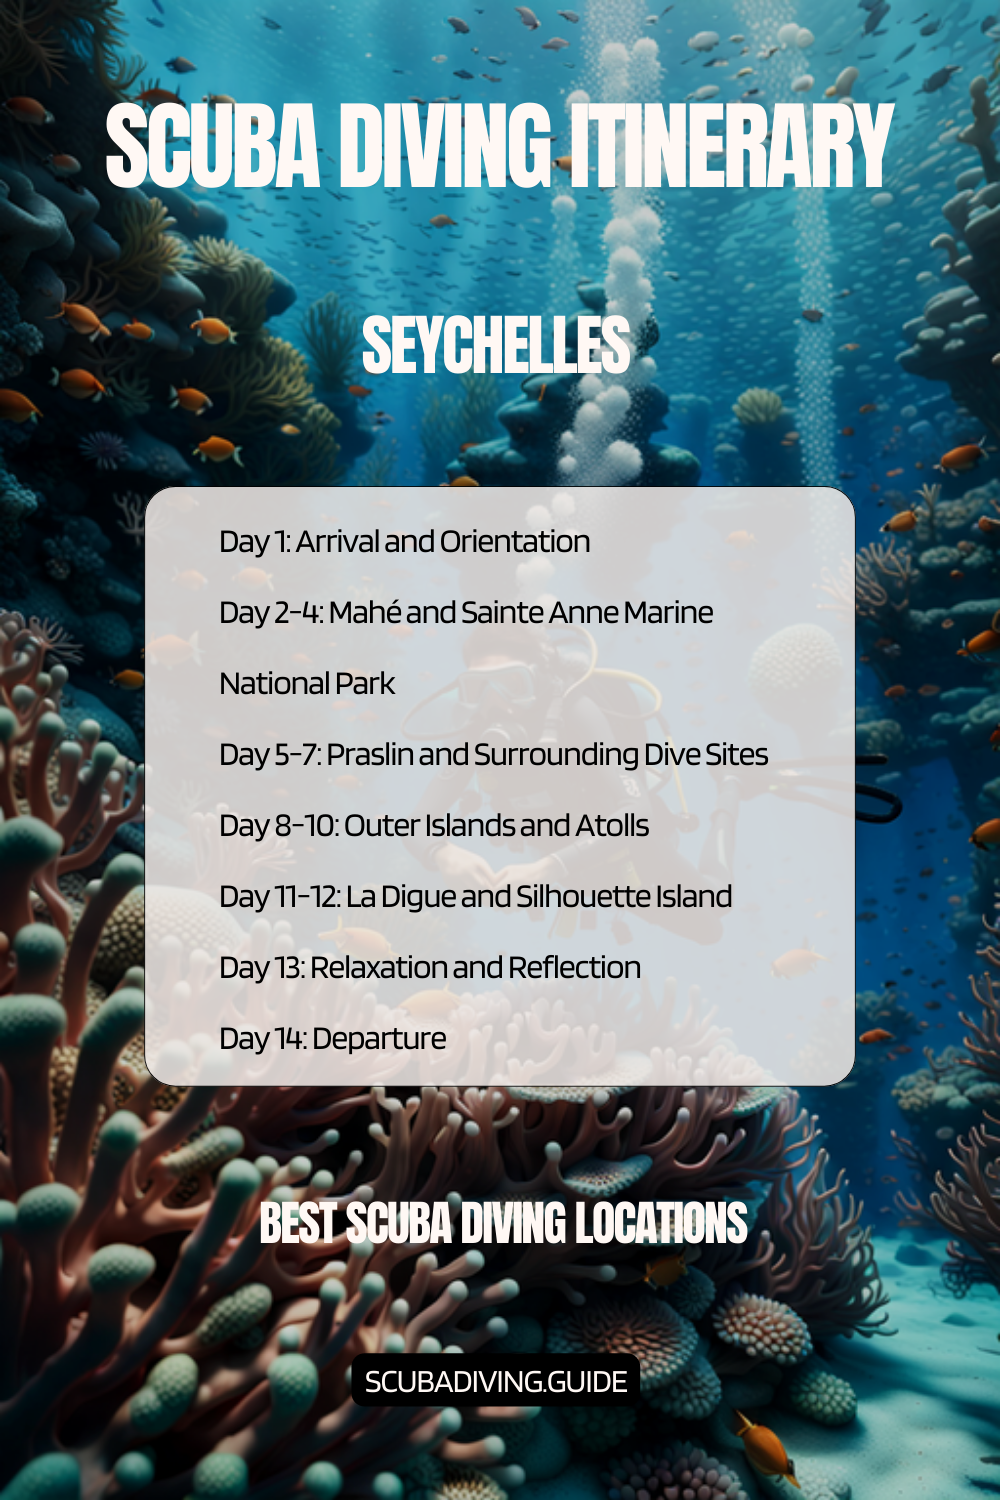 Seychelles Recommended Scuba Diving Itinerary